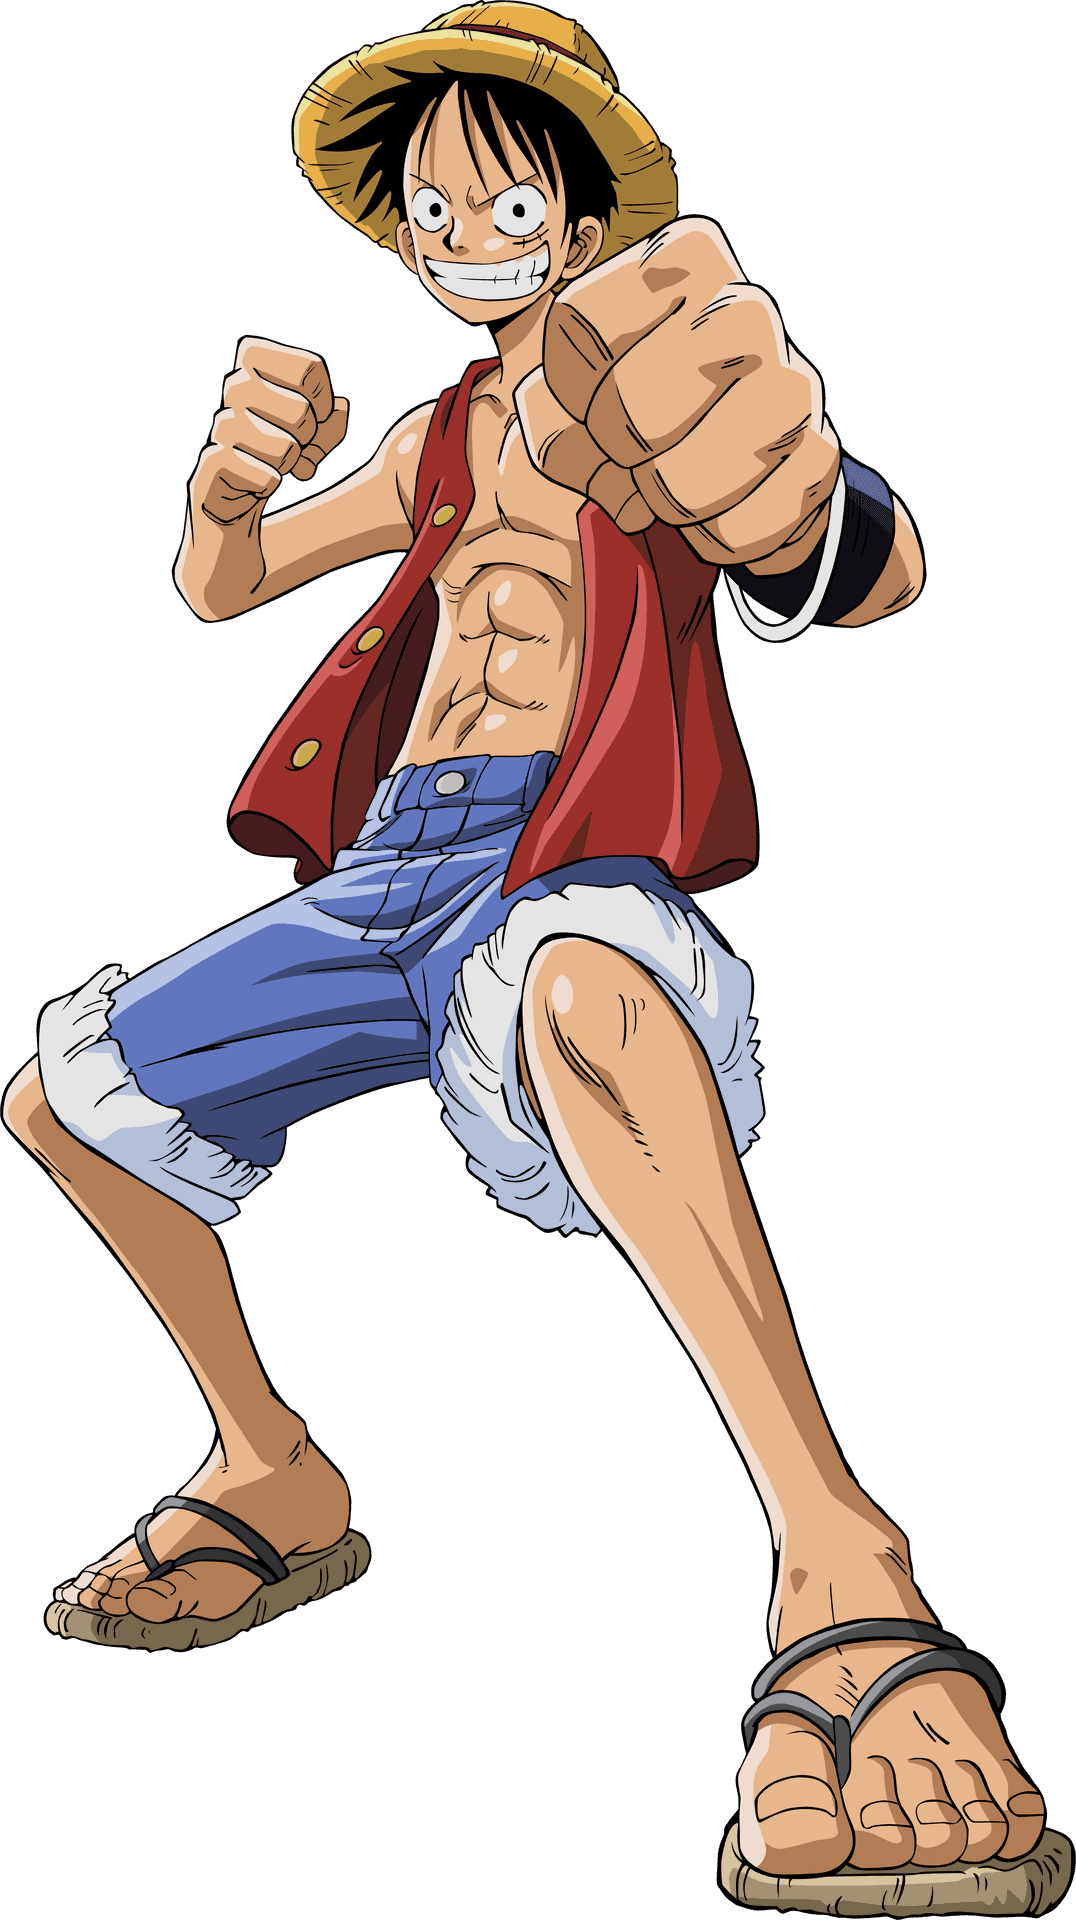 My Bro wanted a fanart of him as Monkey D Luffy! Made by me. : r/pics